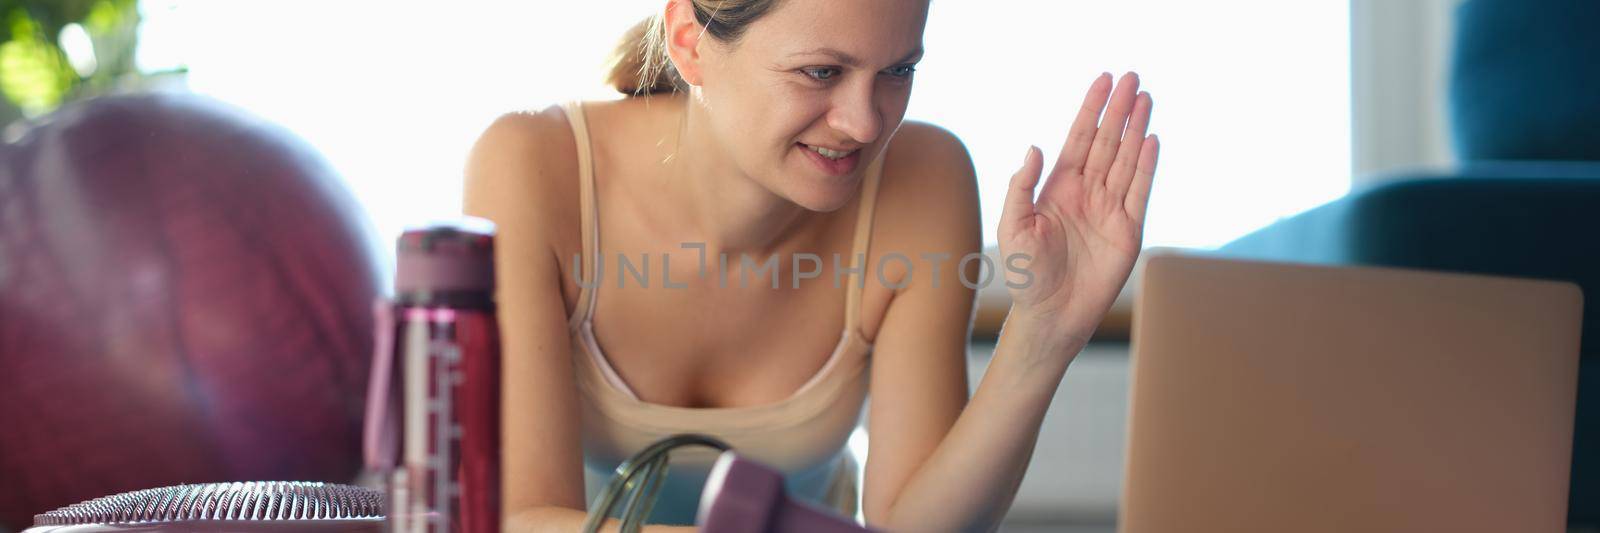 Smiling woman greets fitness trainer through laptop monitor. Introduction of sports blog remotely concept